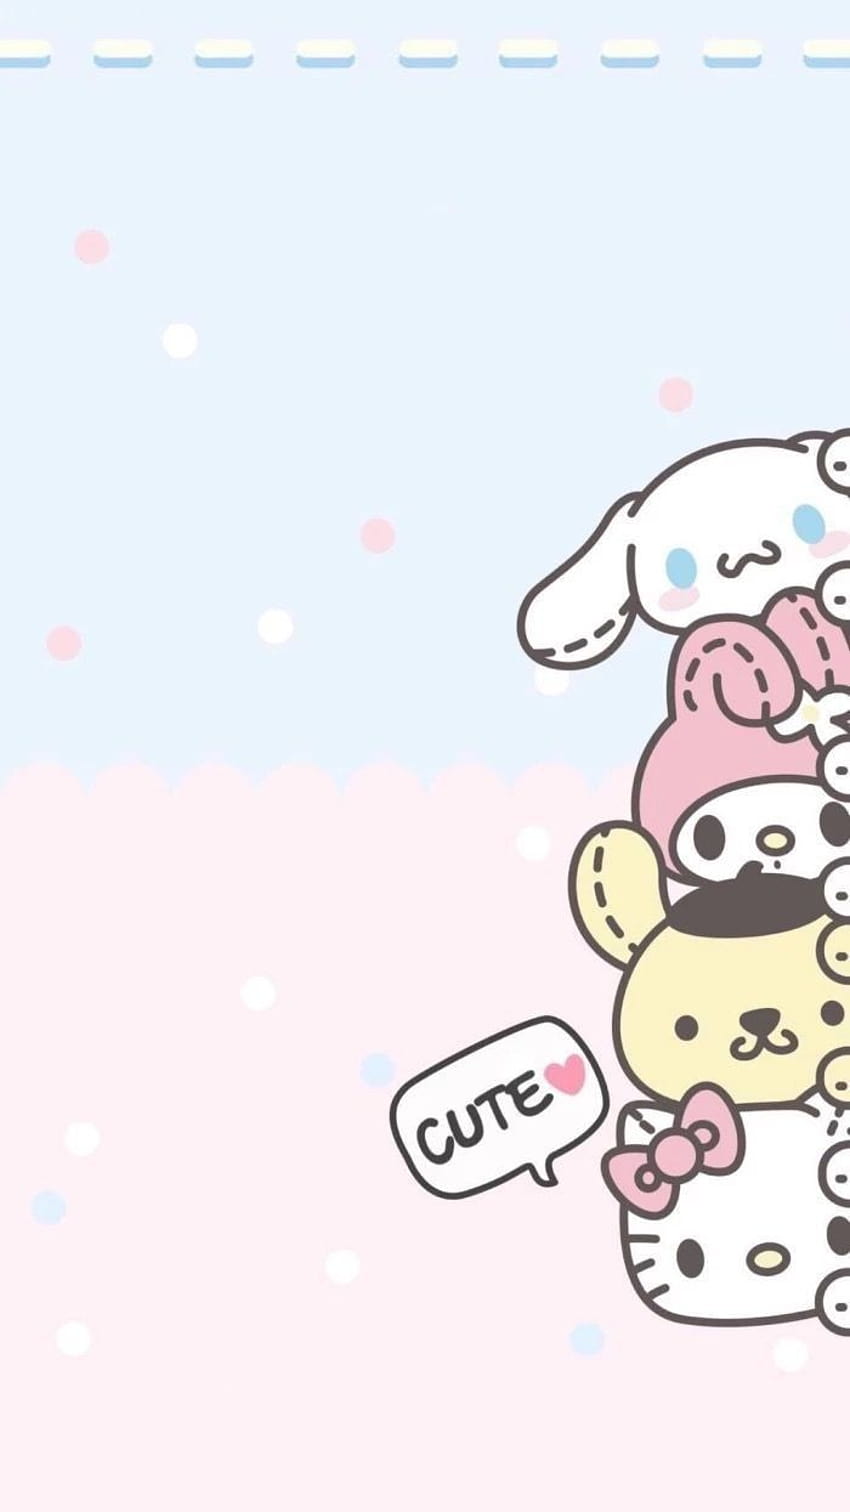 Support Forum View topic [Complete] CUTE SANRIO [1280x1024] for your , Mobile & Tablet, iphone kawaii sanrio HD phone wallpaper